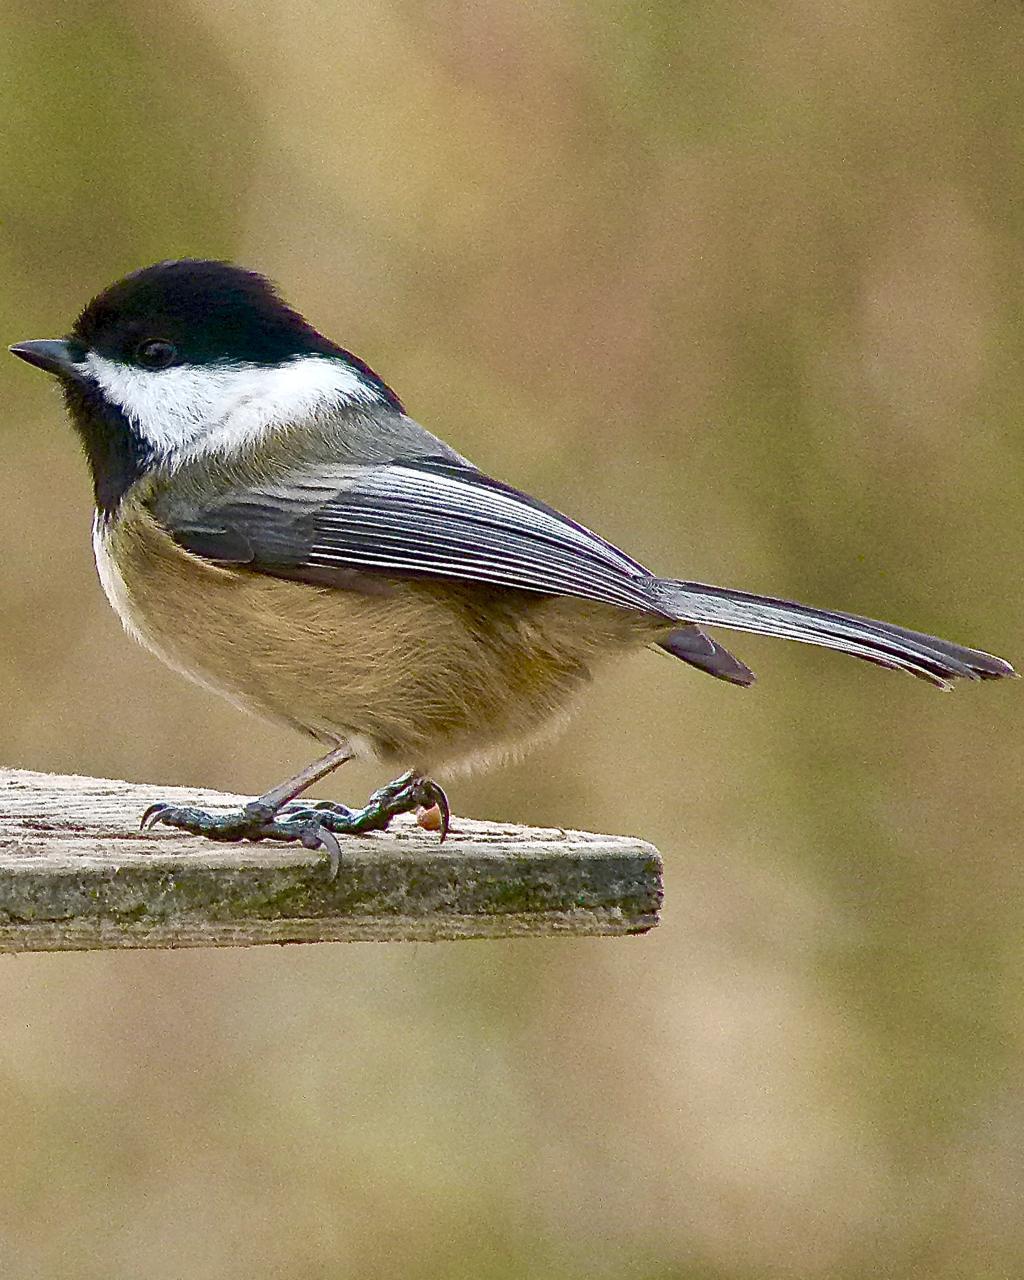 Black-capped Chickadee Photo by Brian Avent